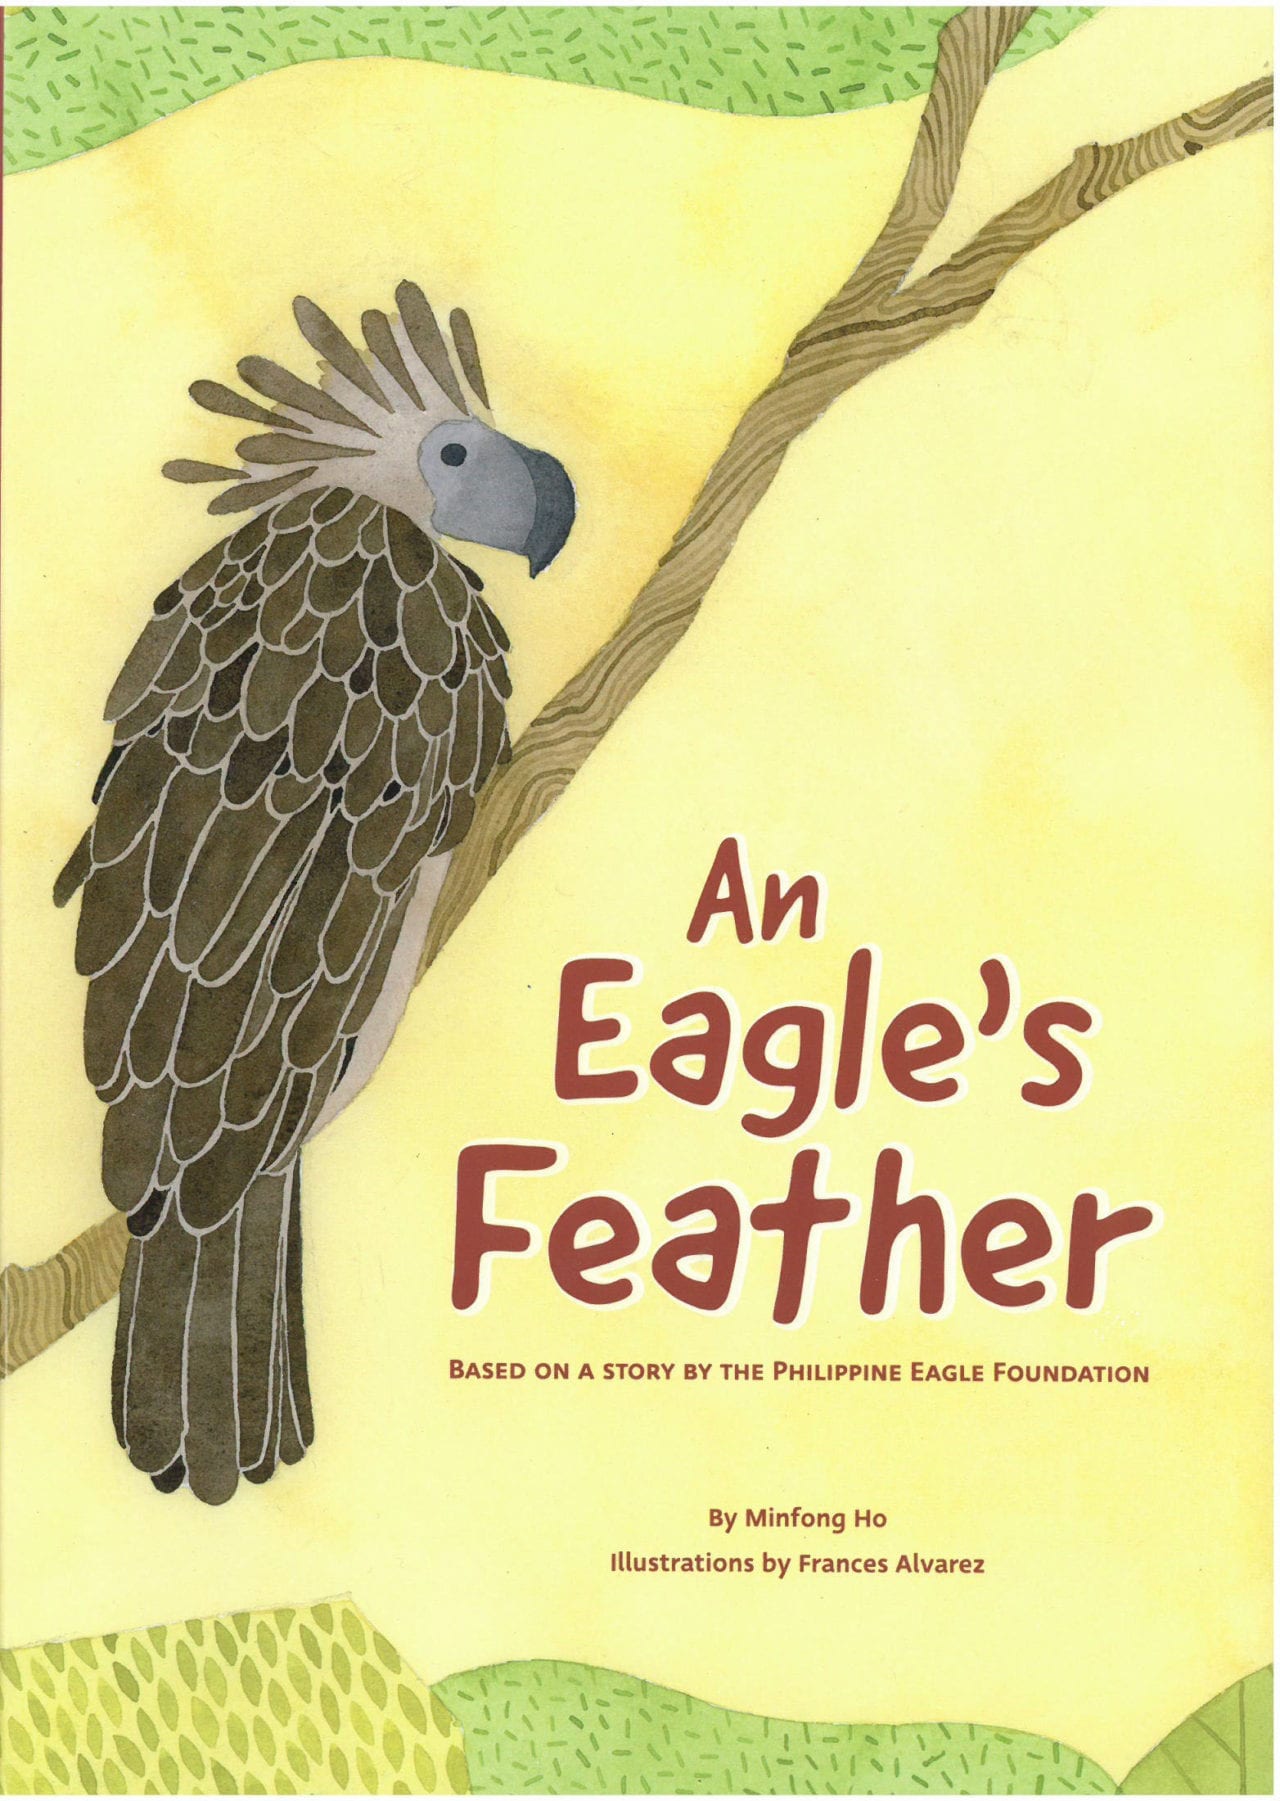 Go to An Eagles Feather on Amazon by clicking the picture.